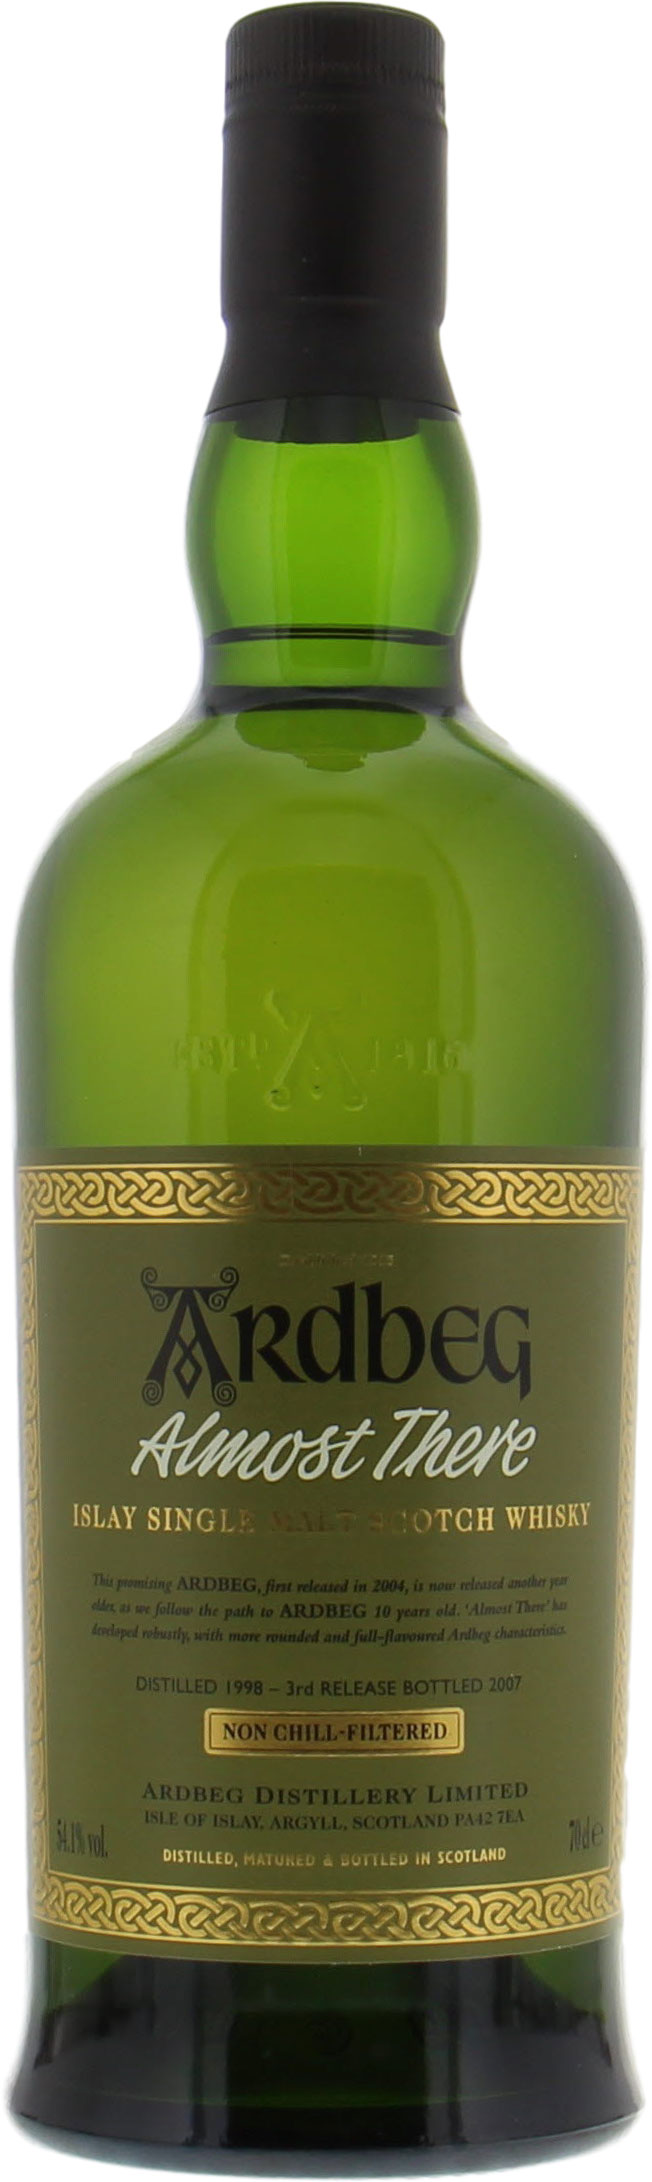 Ardbeg - Almost There 3rd Release 54.1% 1998 NO ORGINAL BOX INCLUDED!